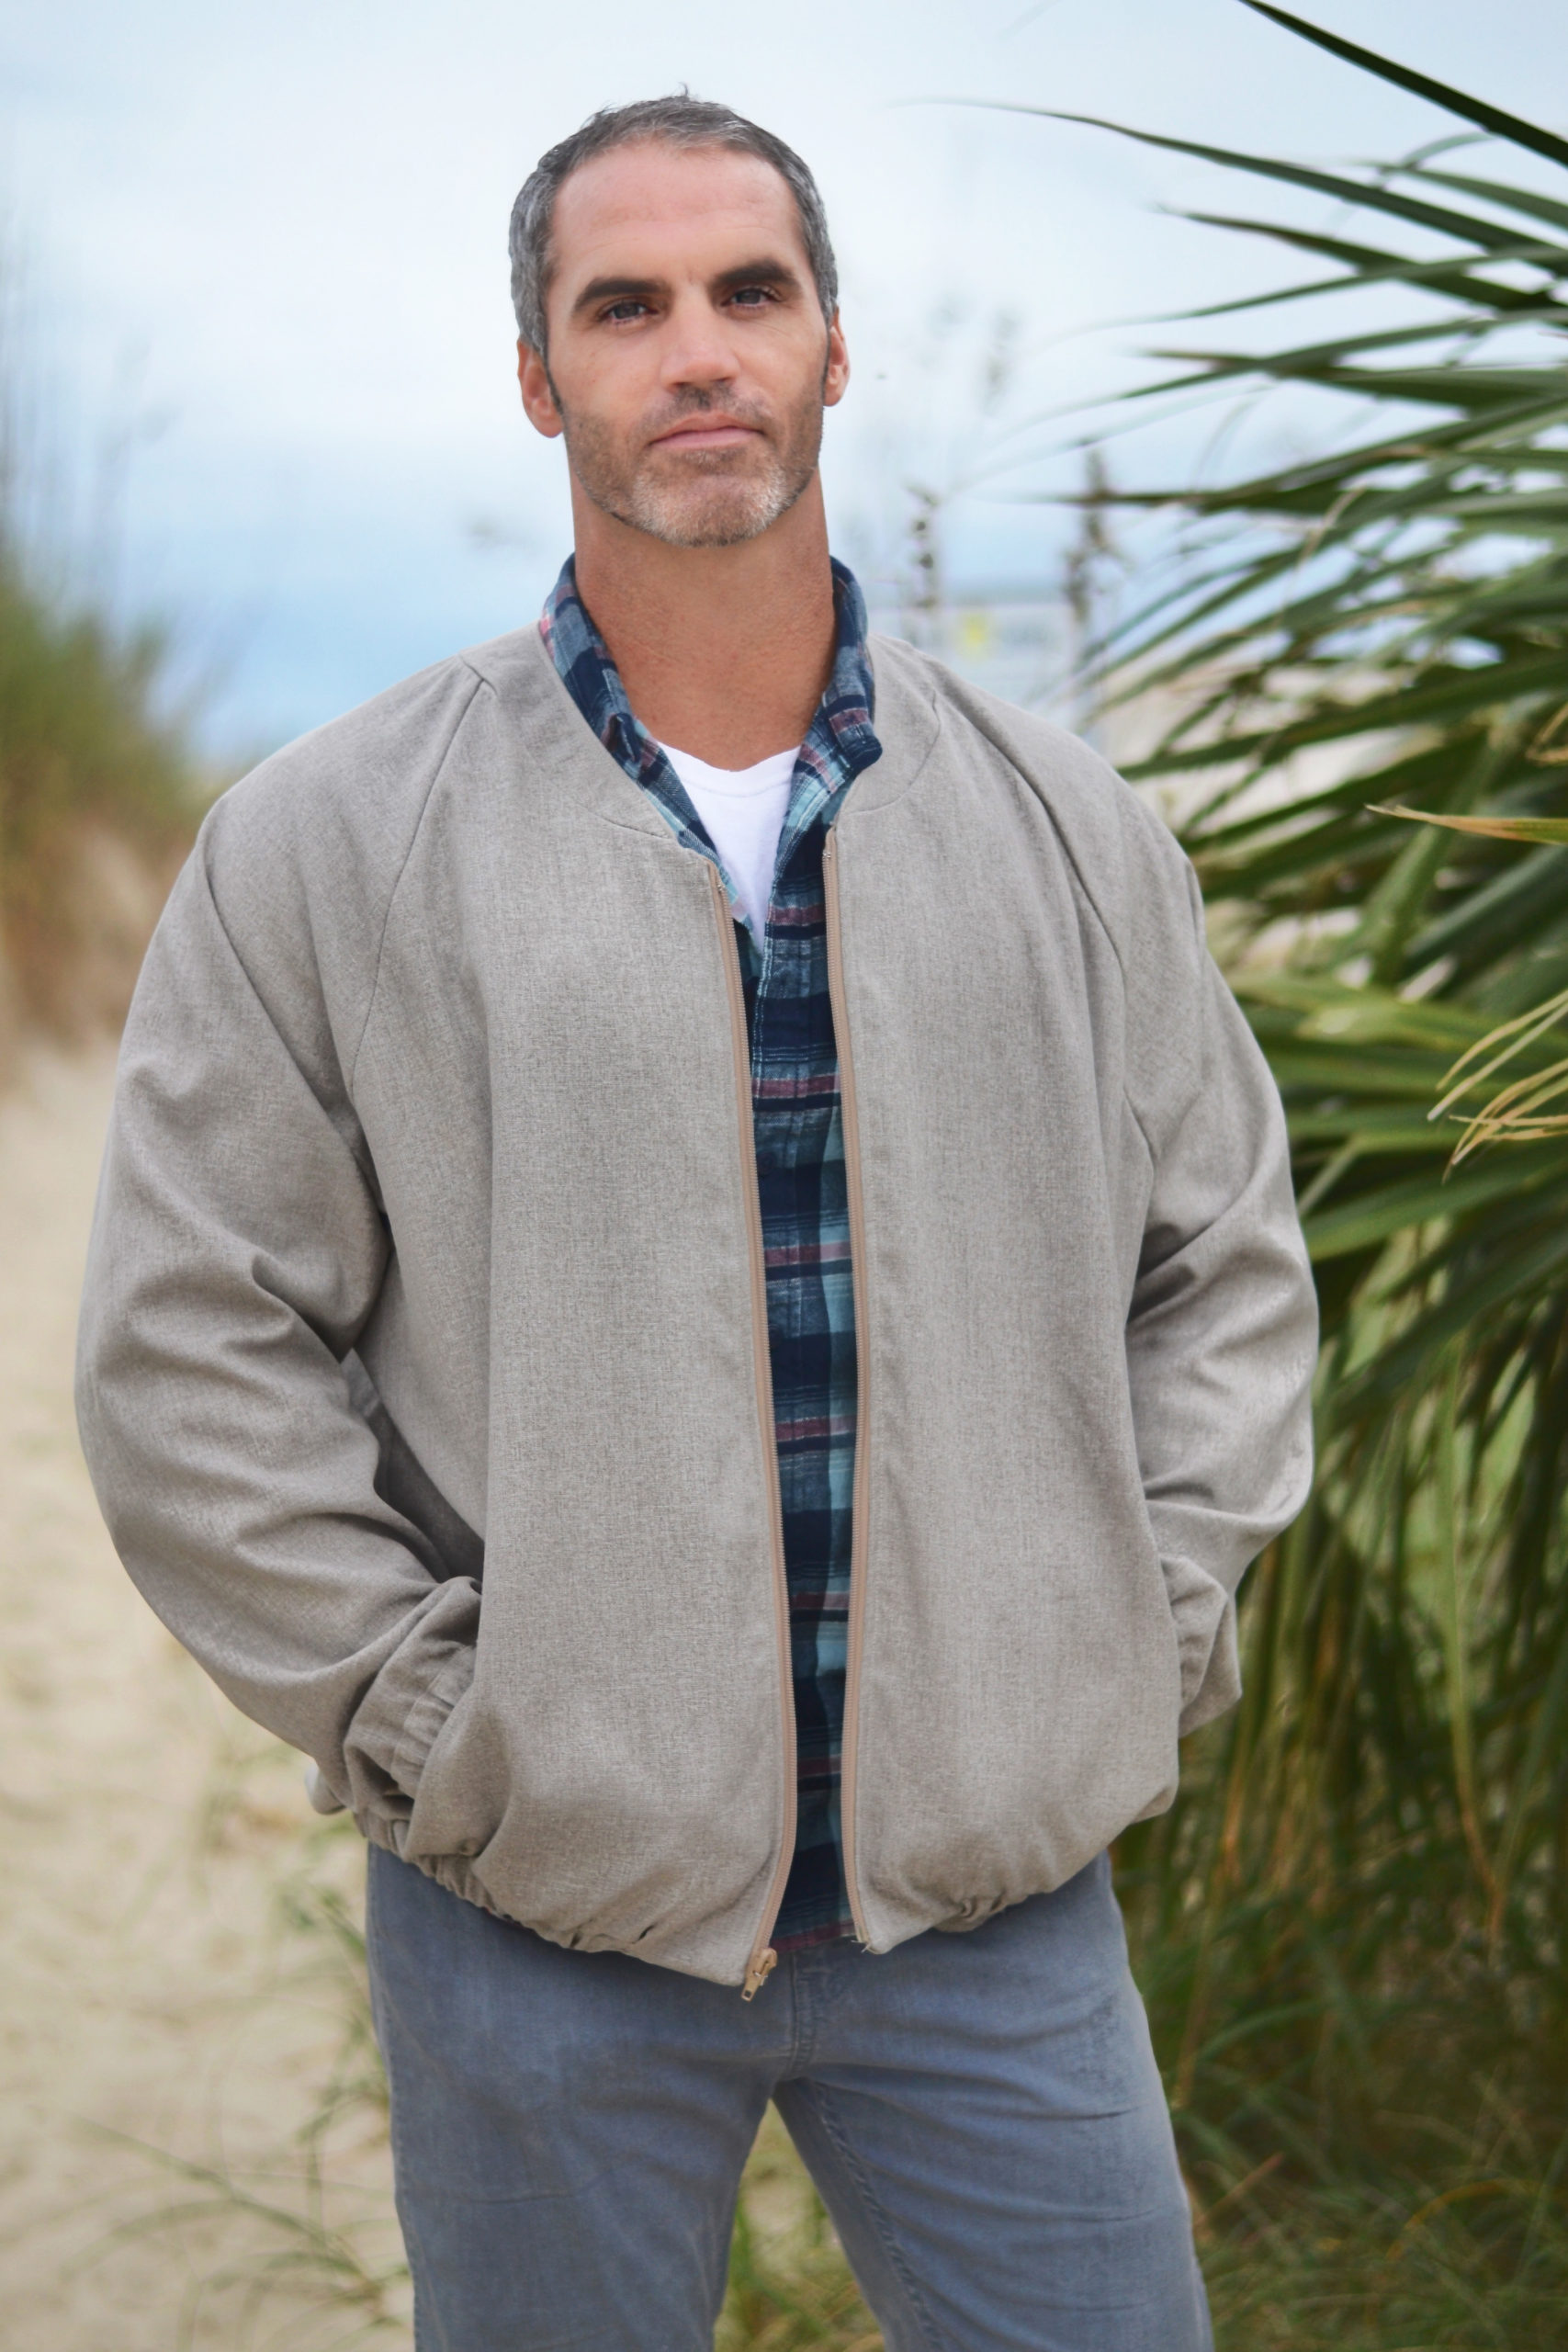 Sew up some warm, sporty casual style with this men’s bomber jacket sewing pattern in sizes XXS to 4XL